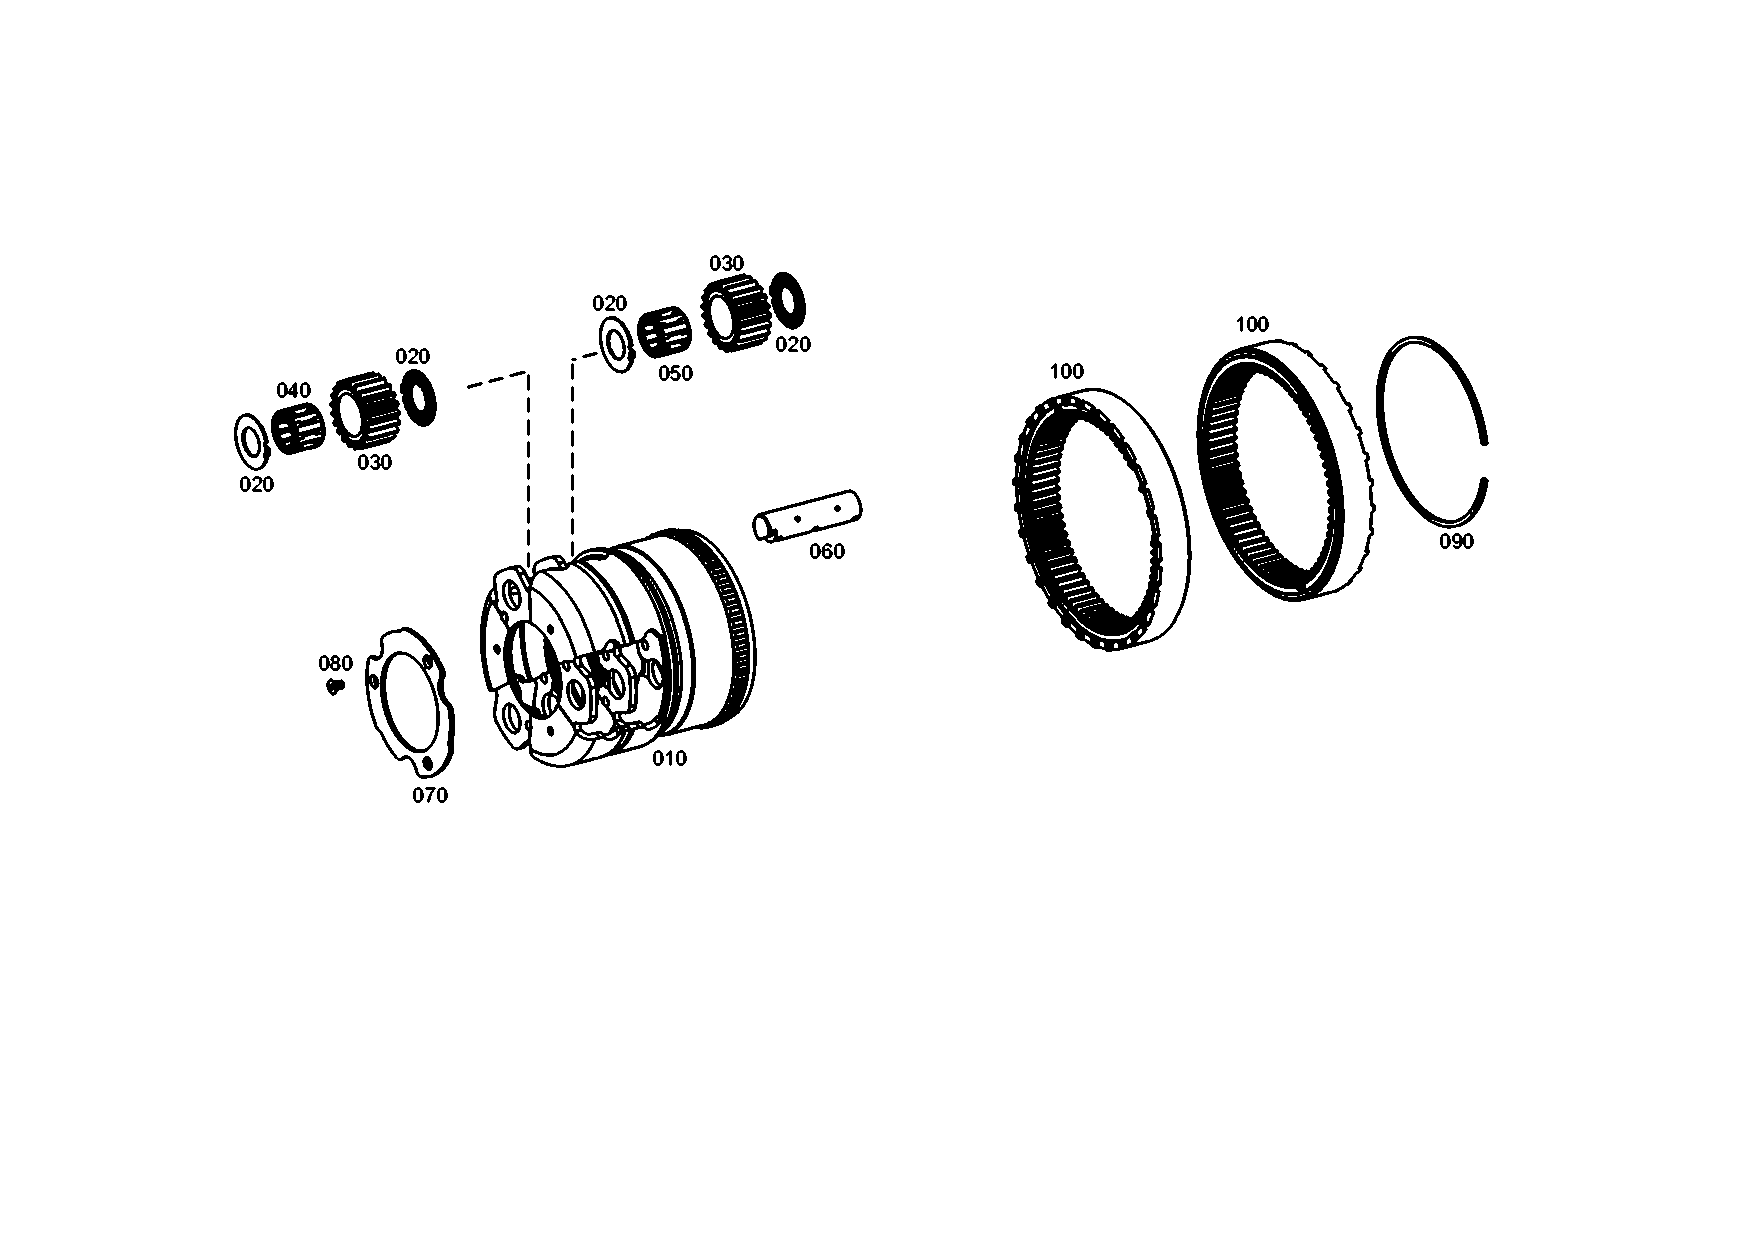 drawing for E. N. M. T. P. / CPG 192300220052 - PRESSURE DISK (figure 5)